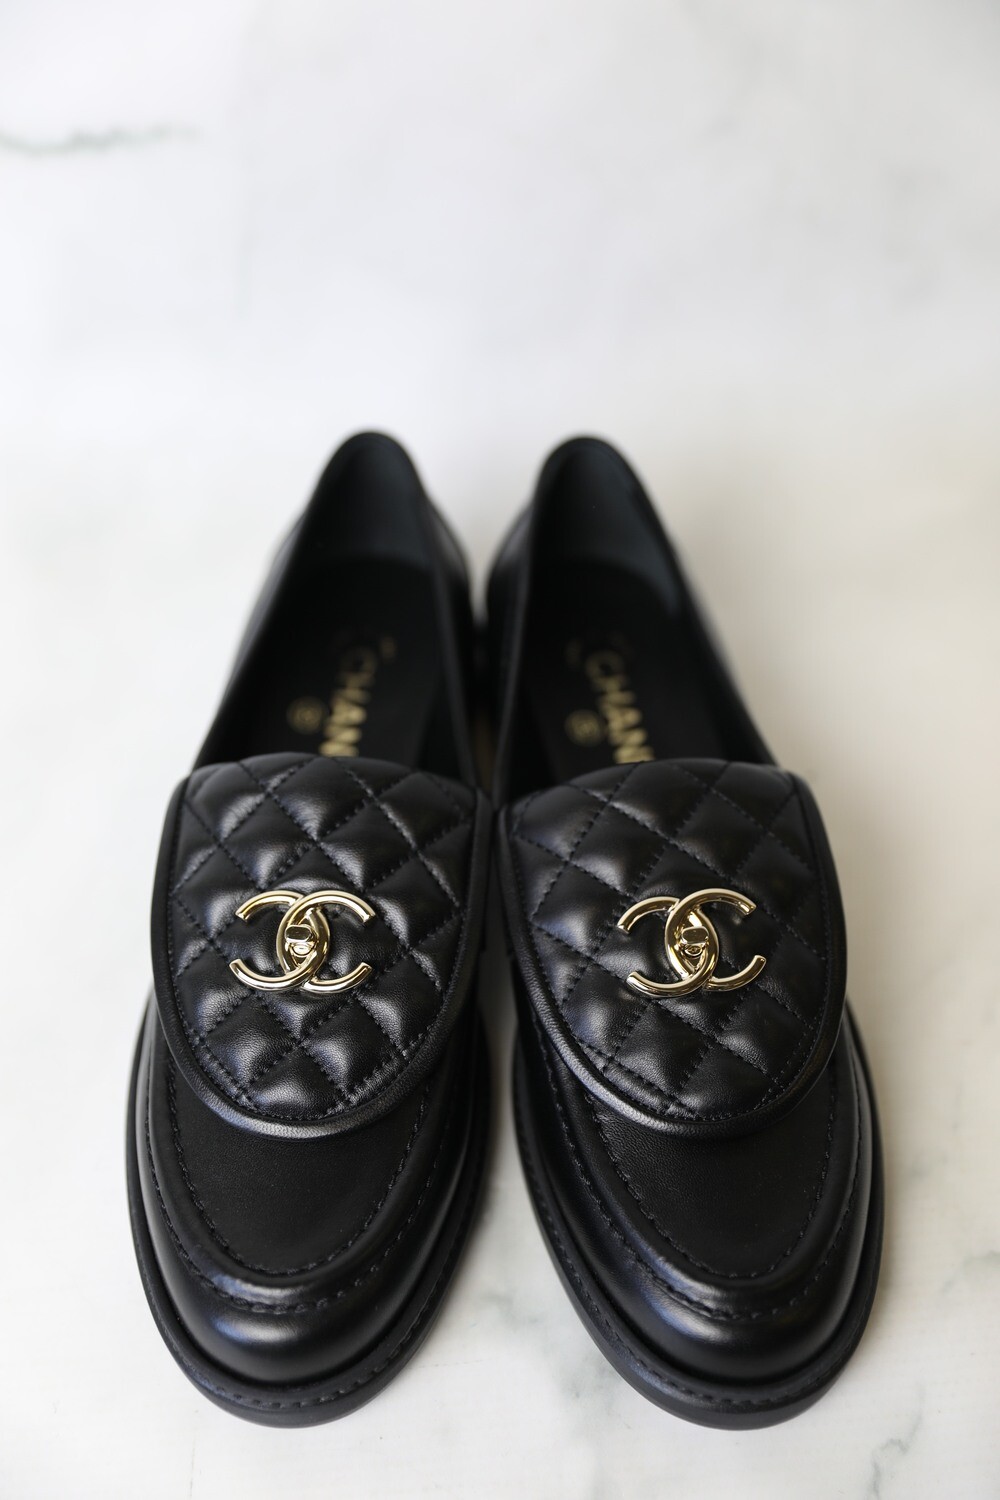 CHANEL, Shoes, Iso Chanel Loafers Black Sz 75885 Looking For